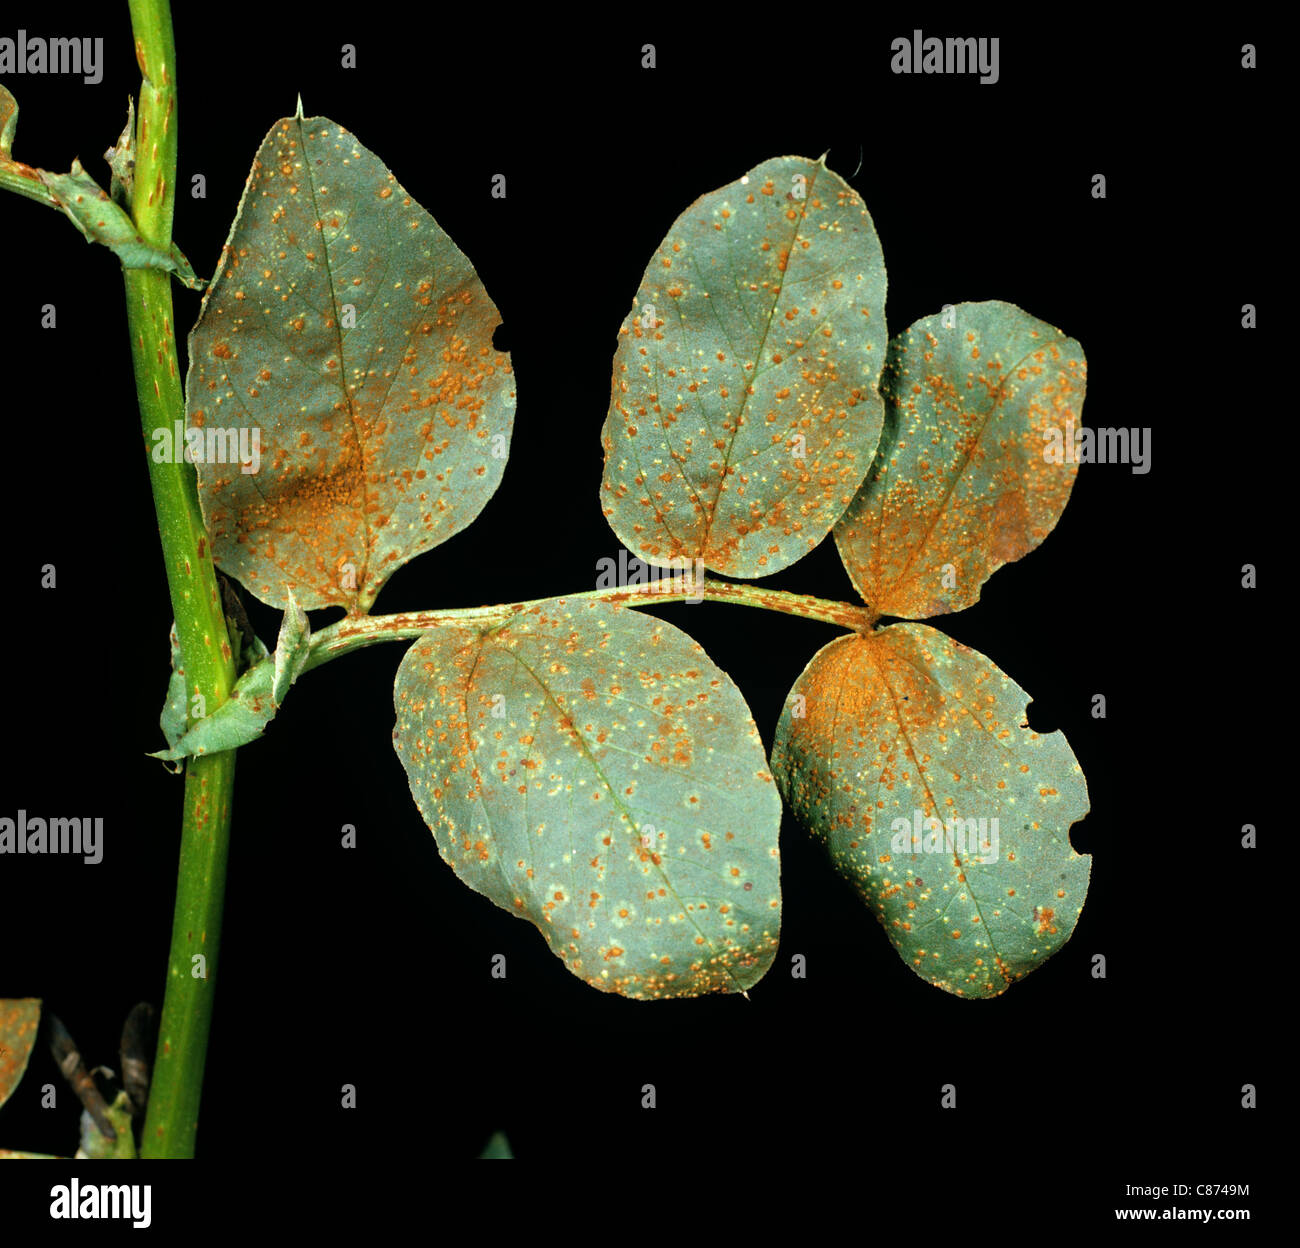 Broad or field bean rust (Uromyces viciae-fabae) infection on field bean leaves Stock Photo